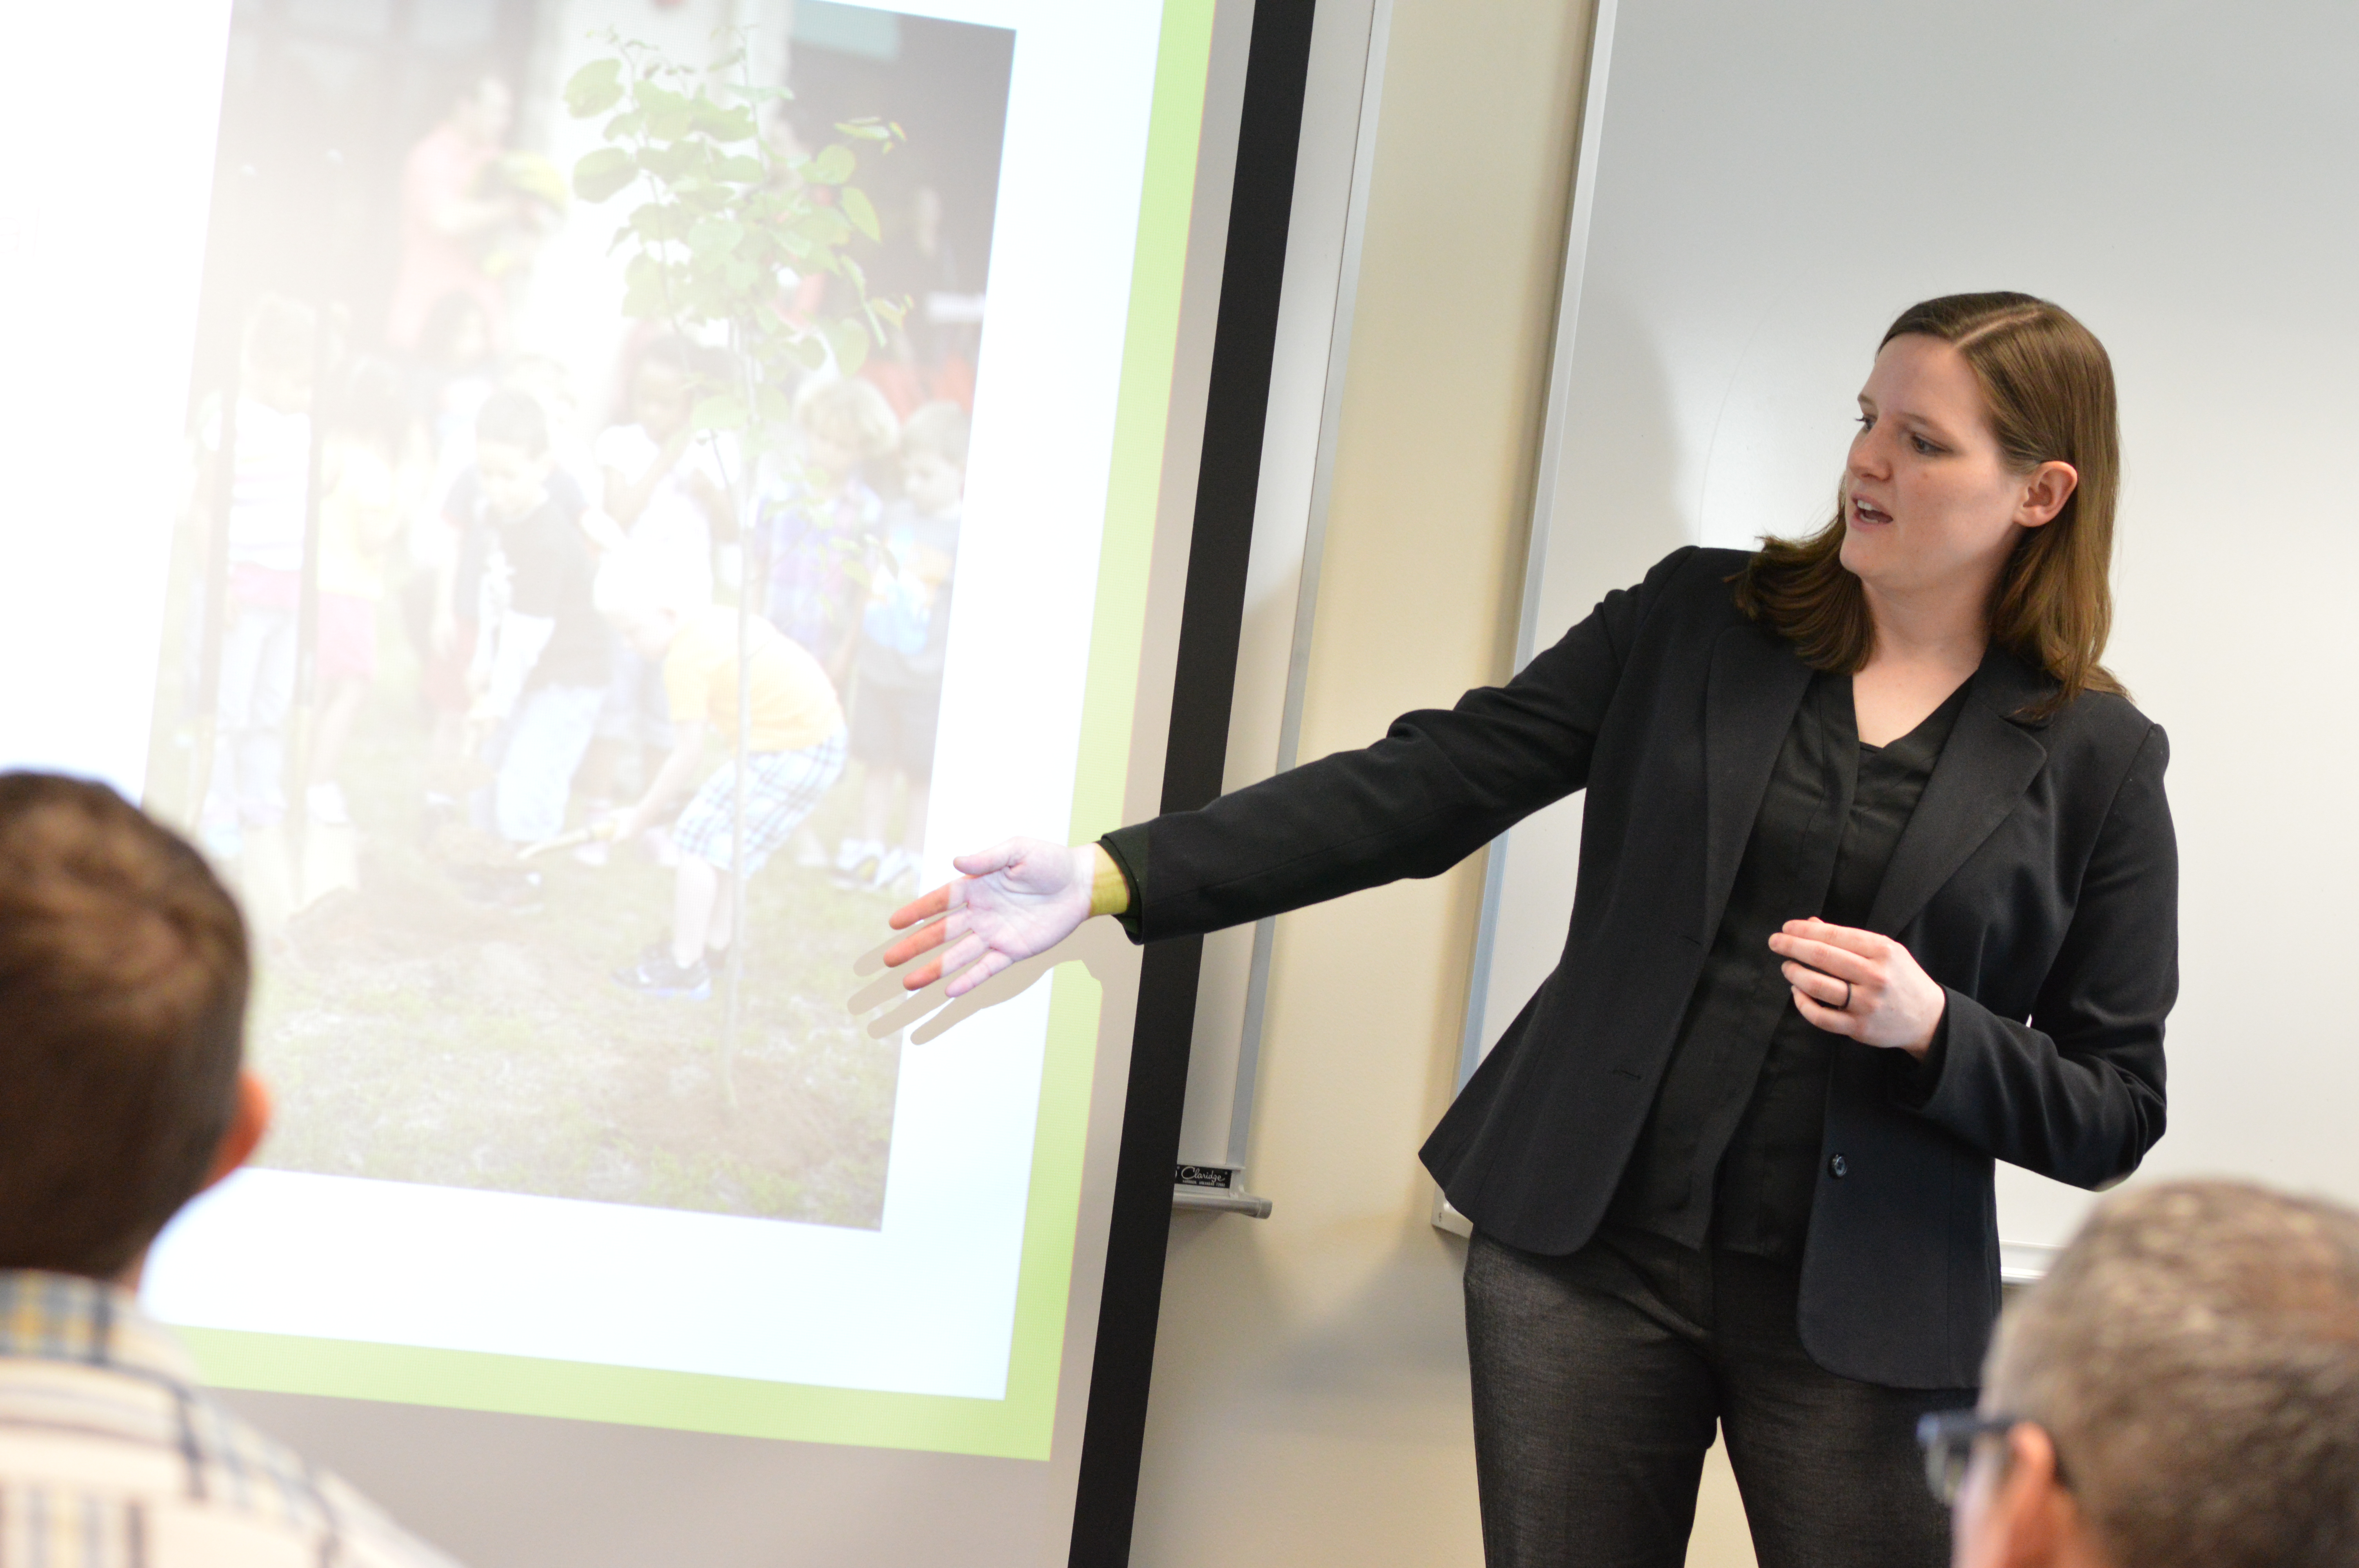 Erin Chambers presents part of the Street Tree Master Plan to city and urban forestry professionals on April 19, 2019, at Hardin Hall. | Shawna Richter-Ryerson, Natural Resources